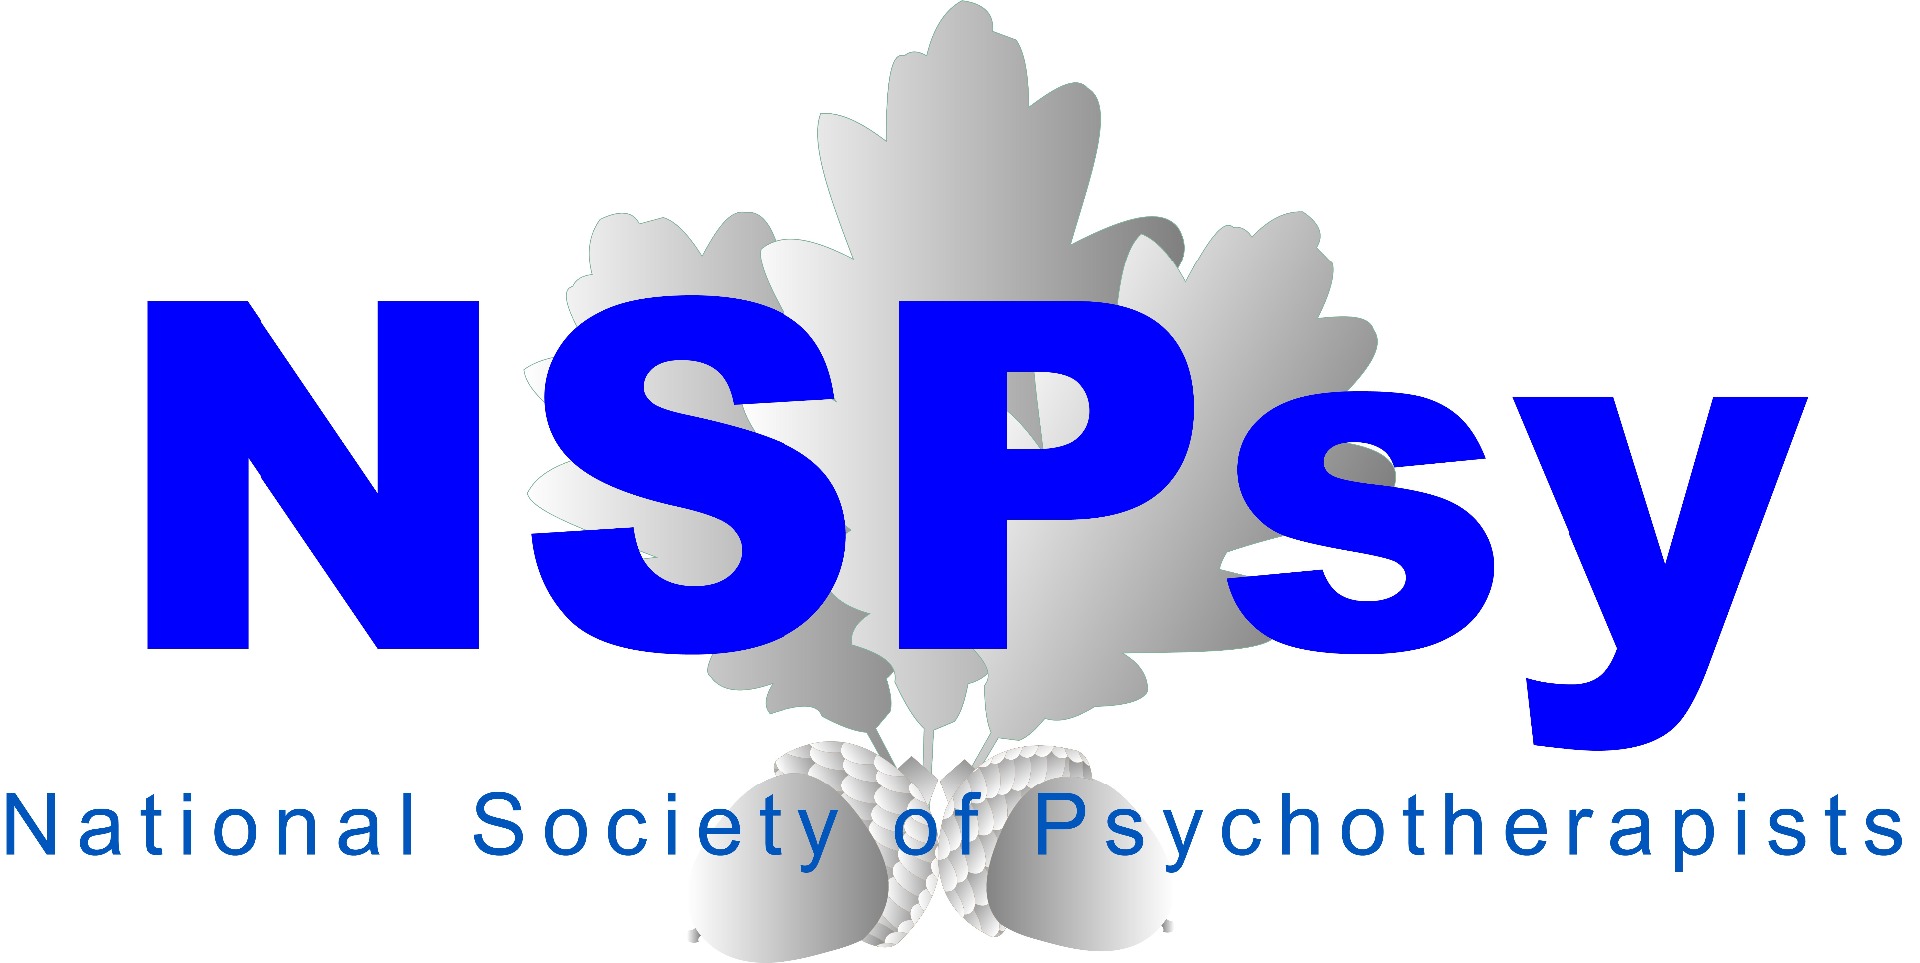 NSPsy supporting hypnotherapists in London practice